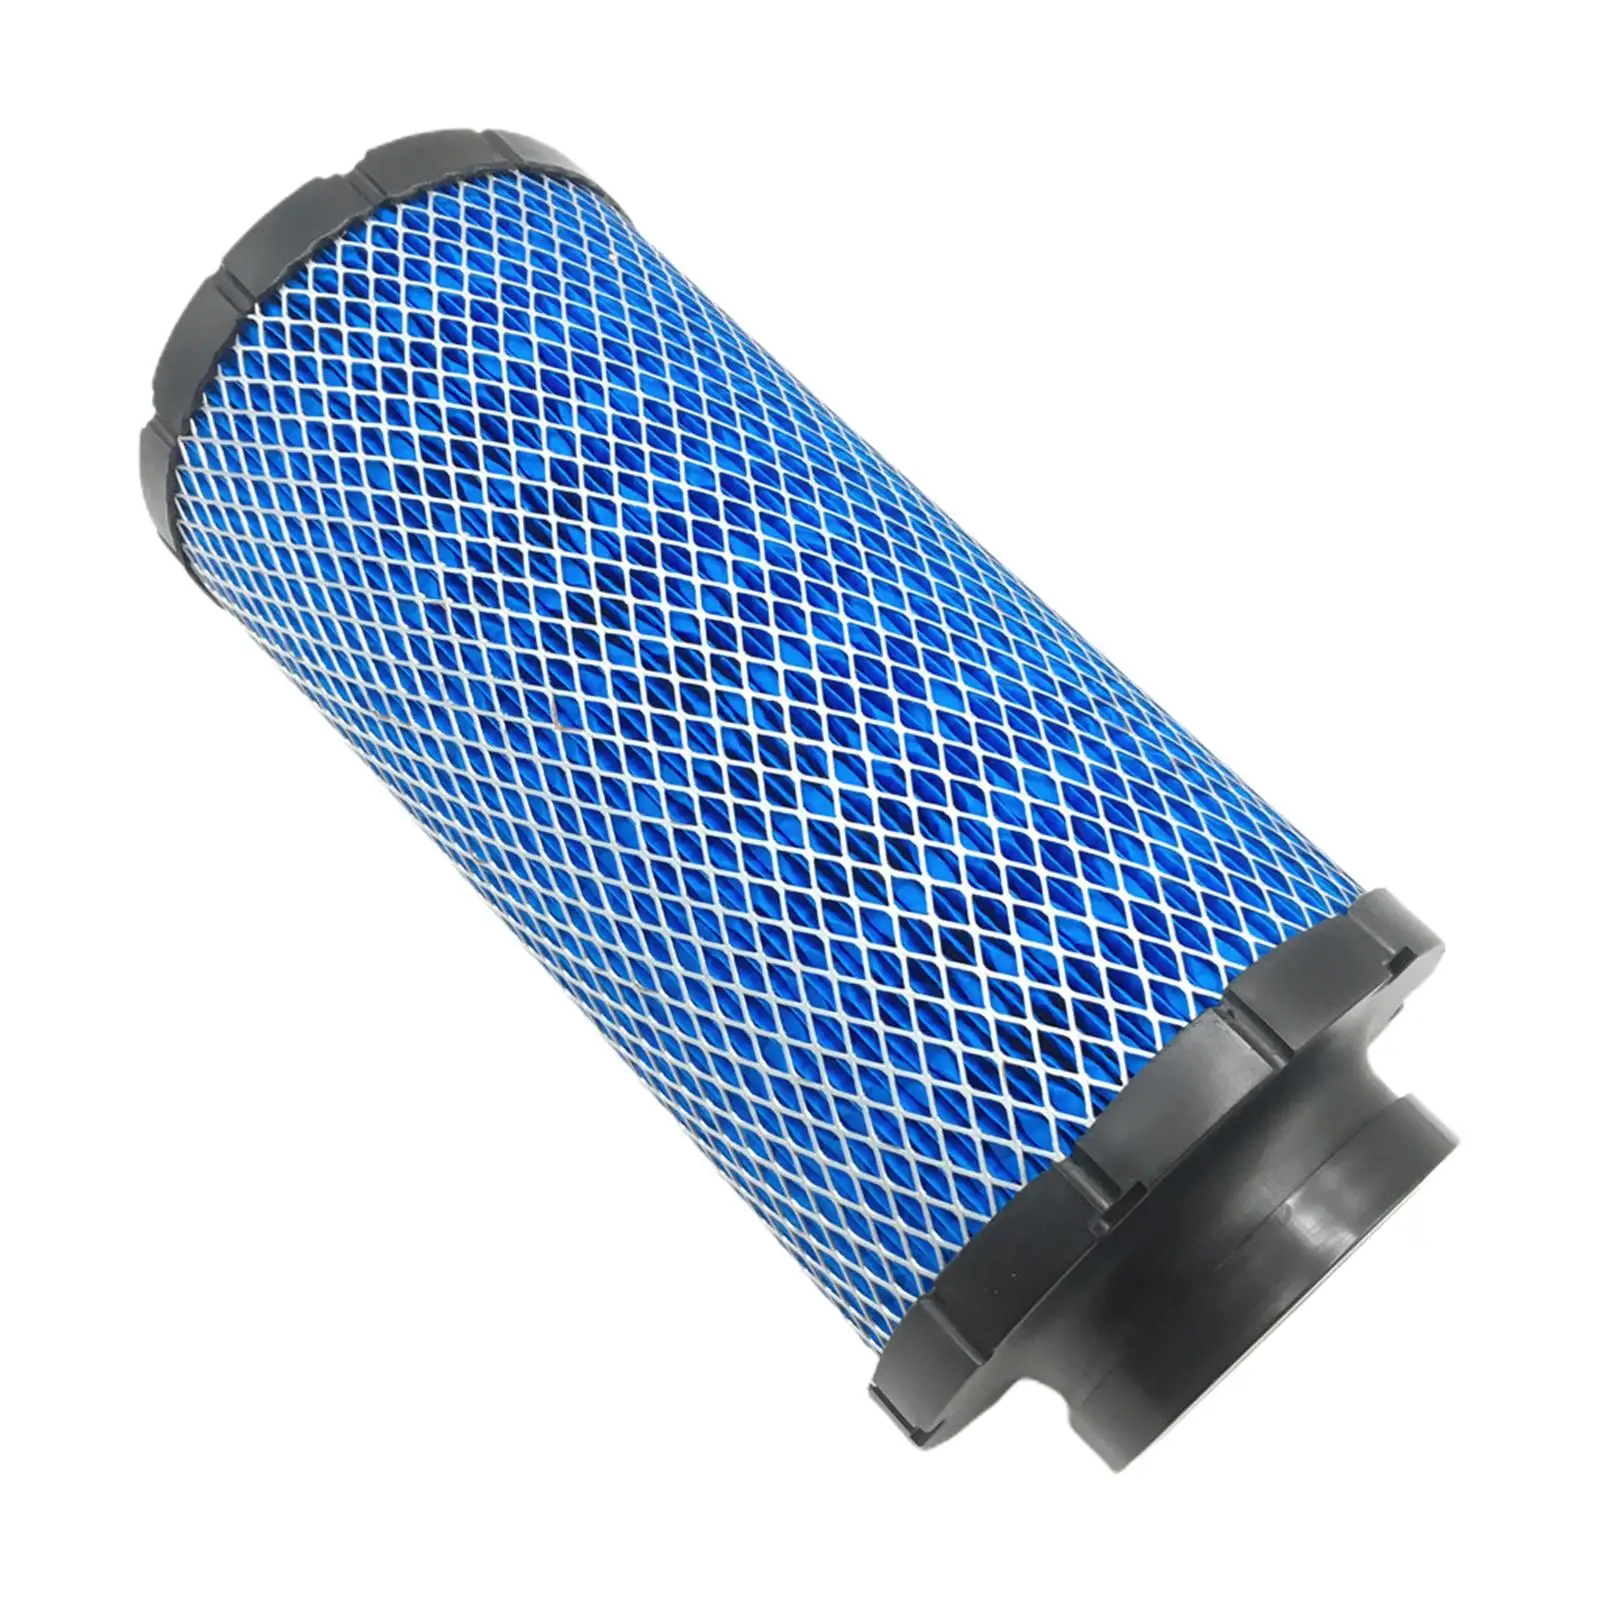 1240957 Air Filter Cleaner Replace for rzr 1000 XP 900 1000 Motorbike